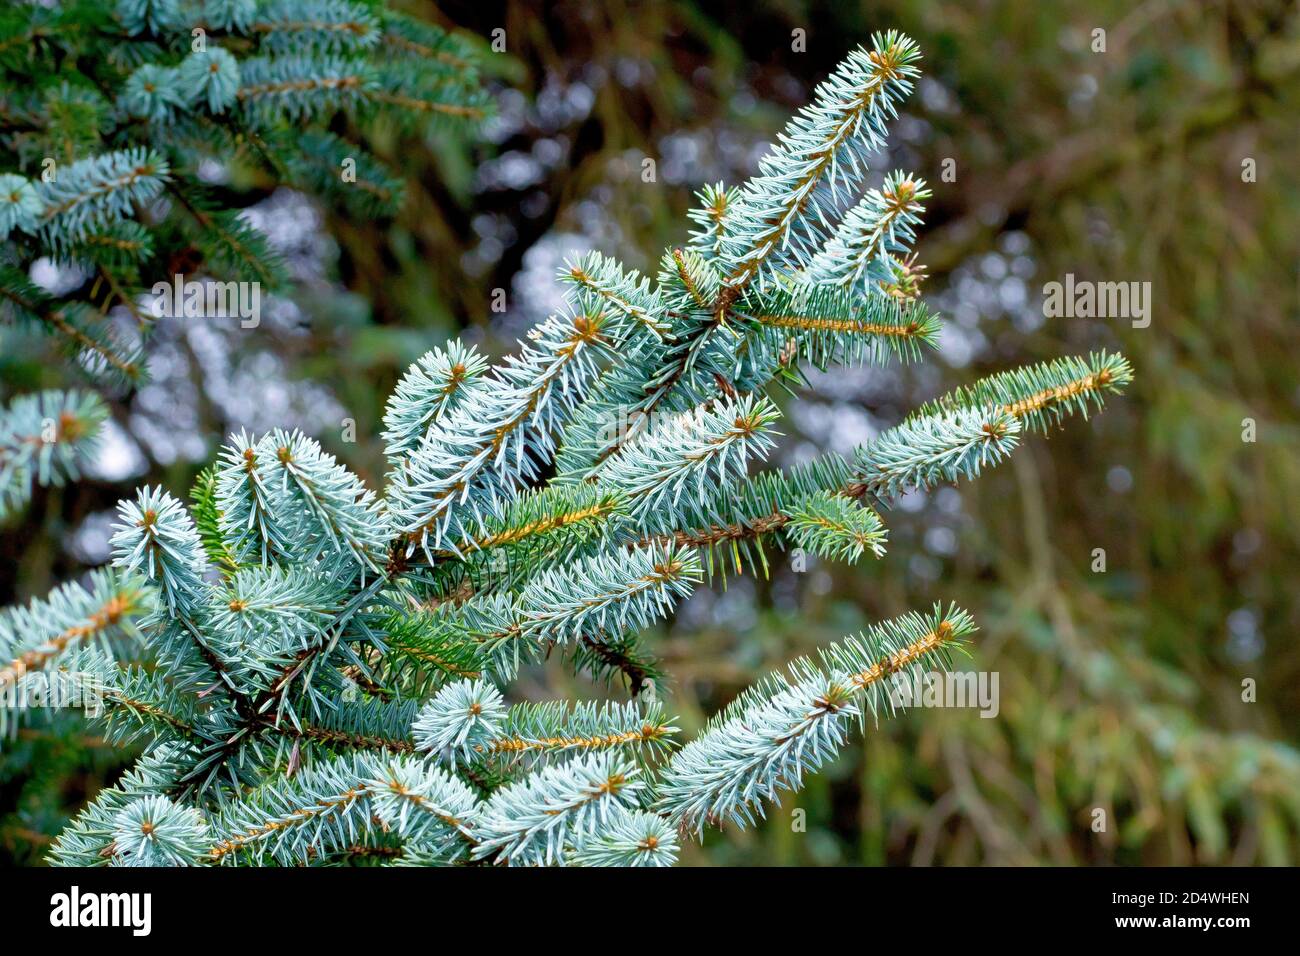 Sitka Spruce (picea sitchensis), close up showing a branch of the distinctly blueish needles of the tree. Stock Photo